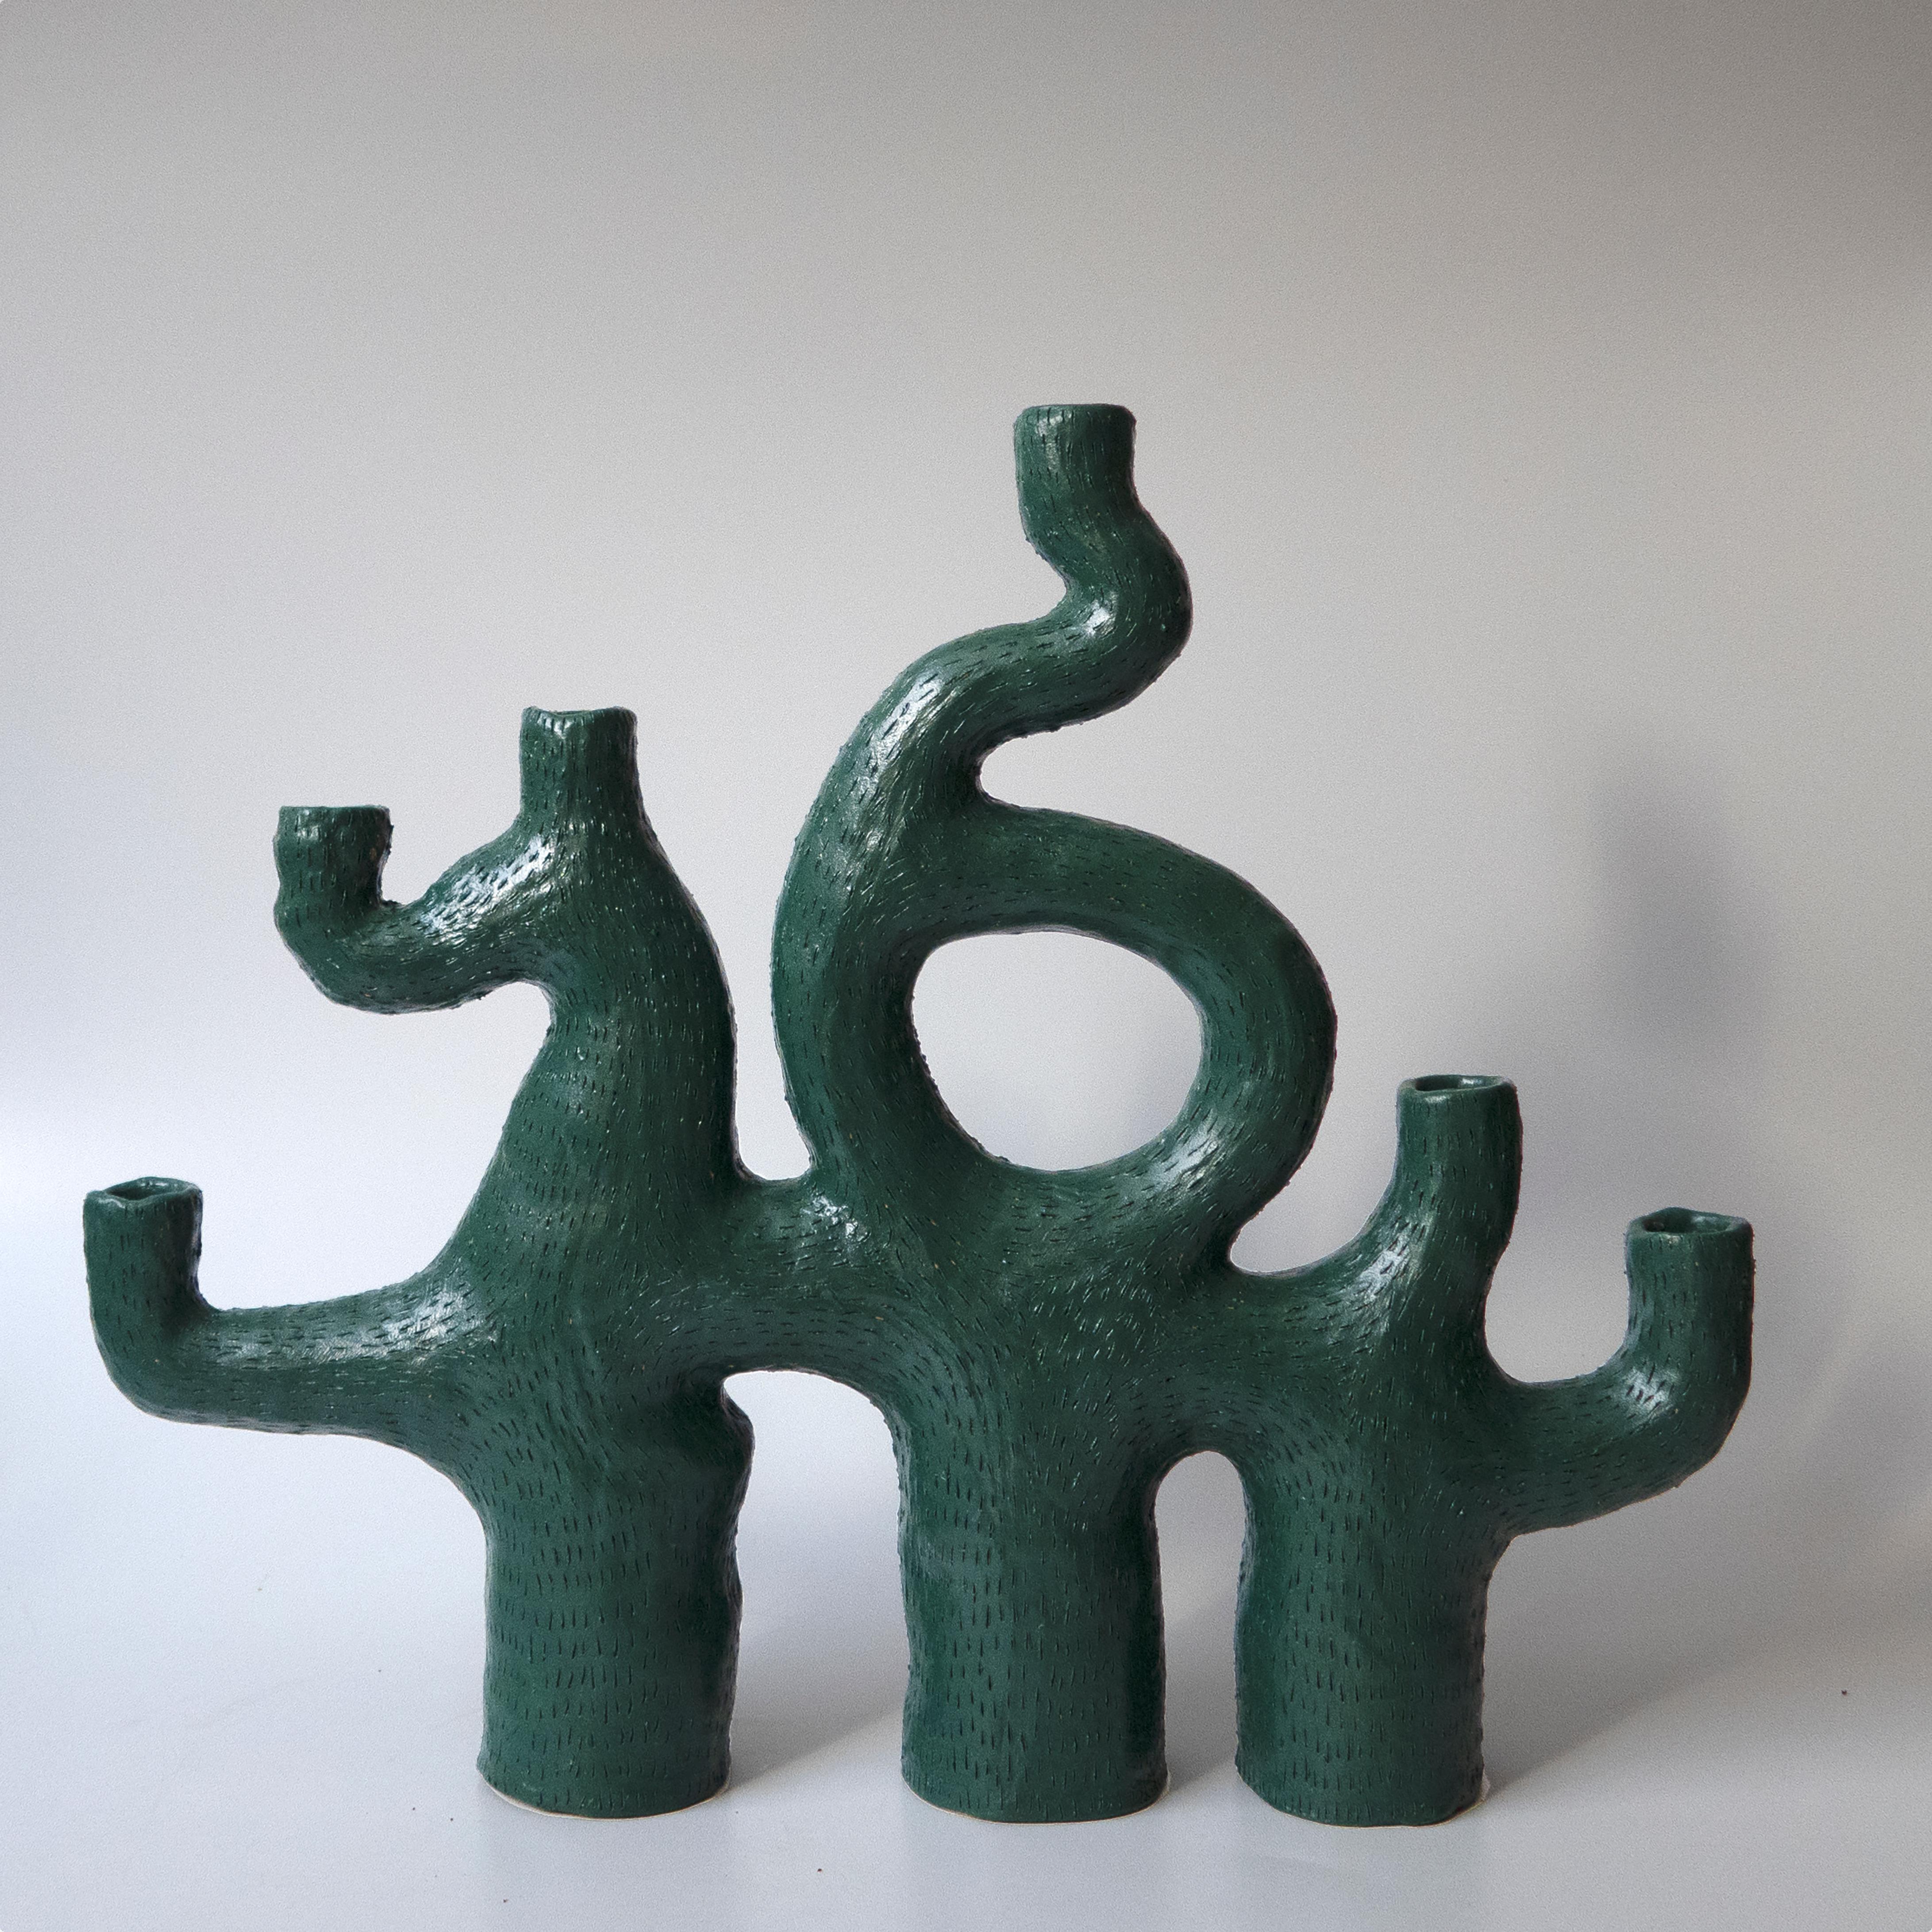 Unique sea candelabra by Jan Ernst
Dimensions: W 45 D 12.5 H 48 cm
Materials: Terracotta, stoneware, black clay
.
Glazed to client specification.
Other dimensions available
6 Arms 3 Legs.

The work is influenced by his fascination with